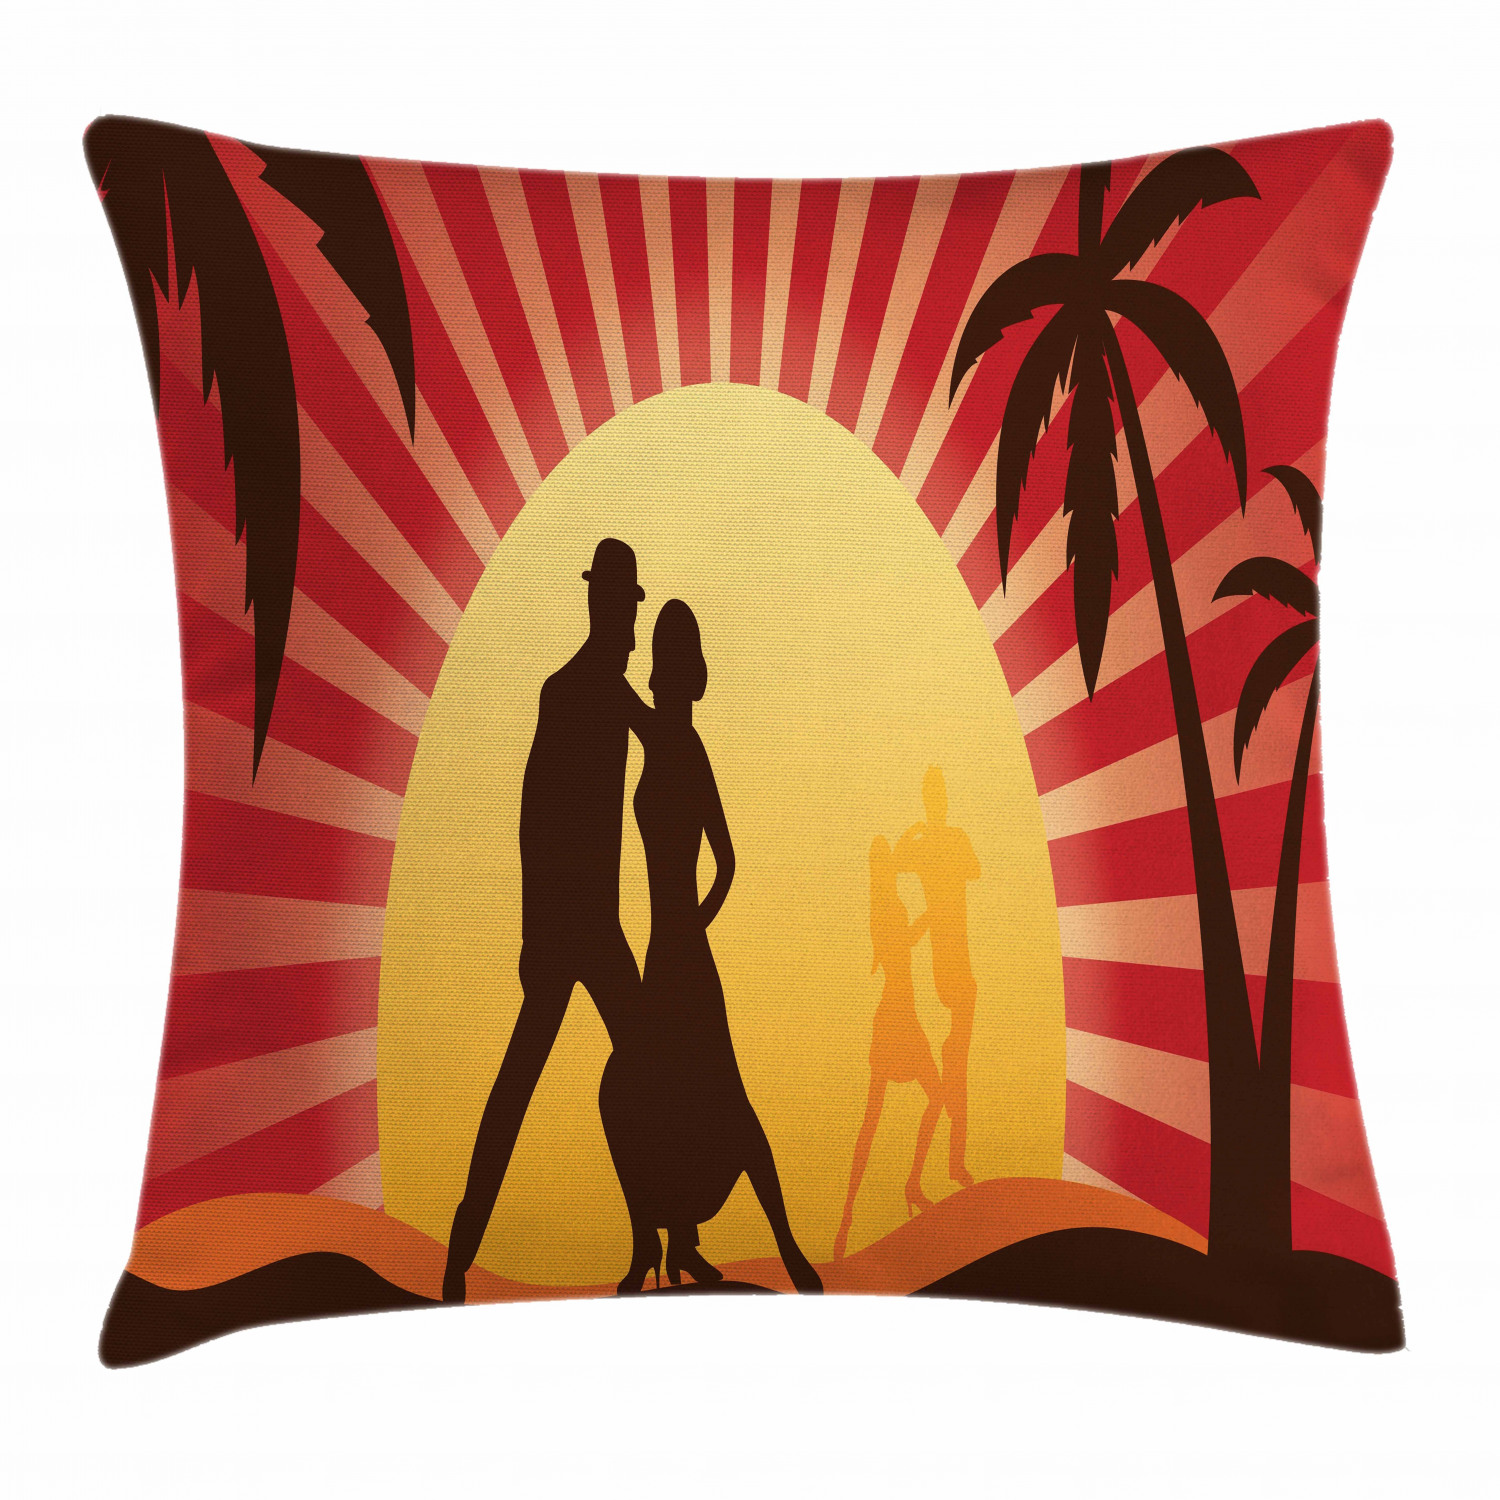 Island Party Throw Pillow Cases Cushion Covers Home Decor 8 Sizes 